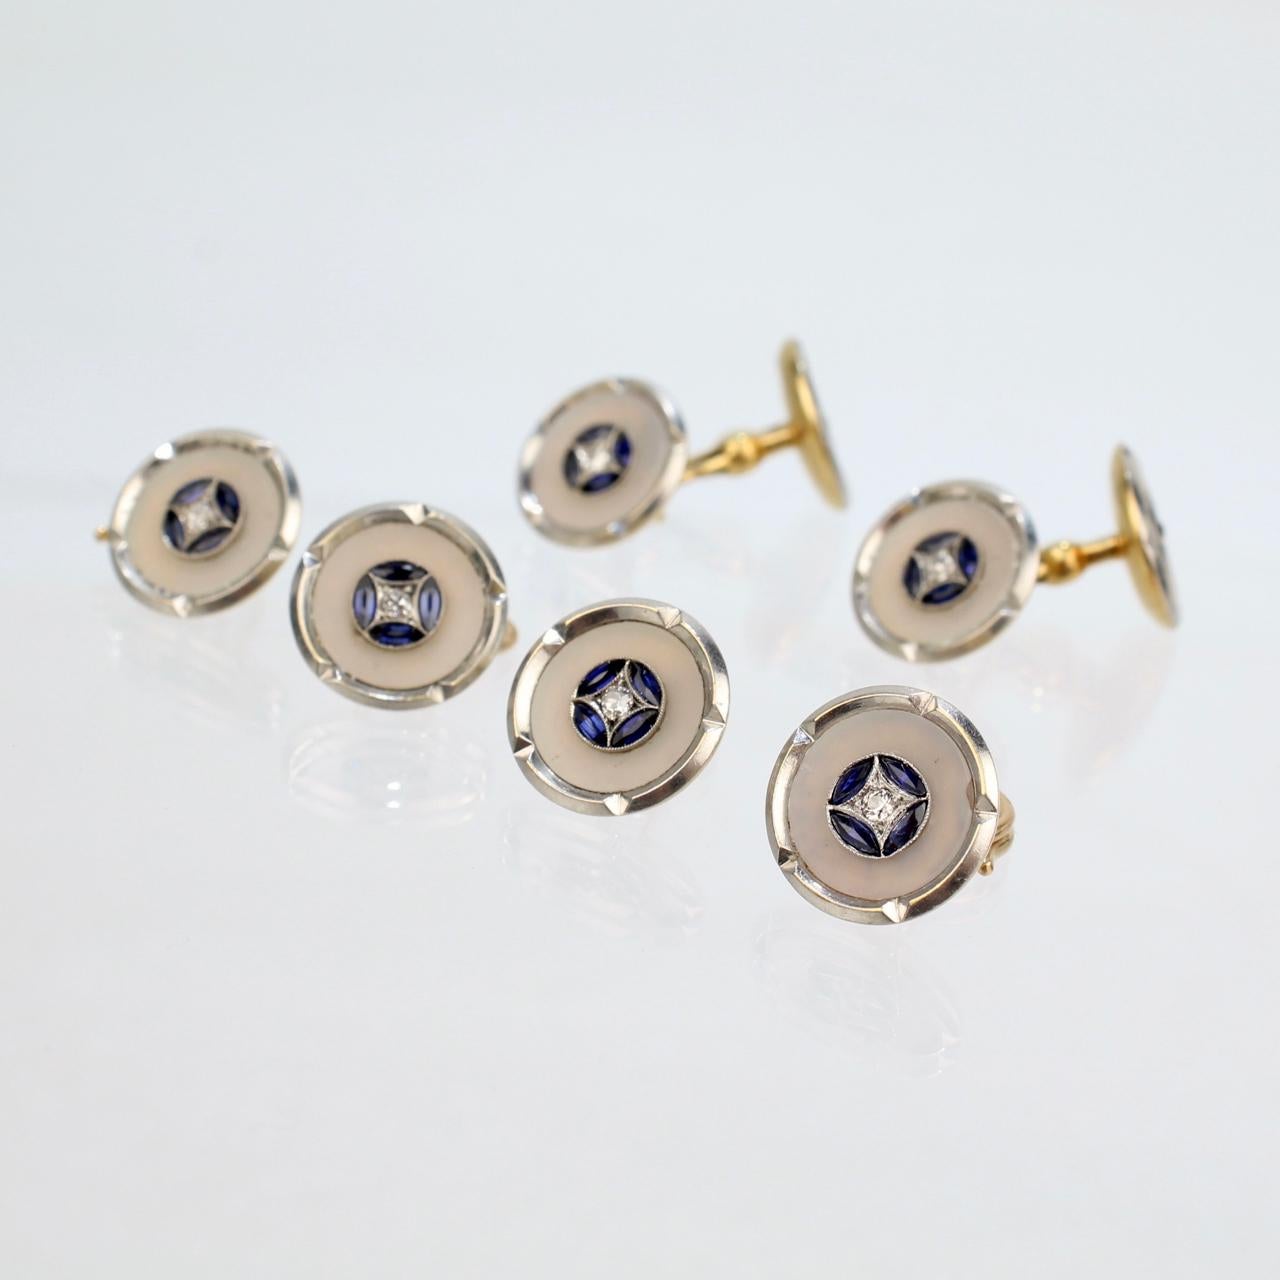 A very fine Art Deco Style cufflink and button set.

Comprised of 4 shirt buttons and a pair of cufflinks.

In platinum-topped 18k gold and set with diamonds, sapphires, and mother of pearl.

Marked to the reverse: 750 for gold fineness and with a